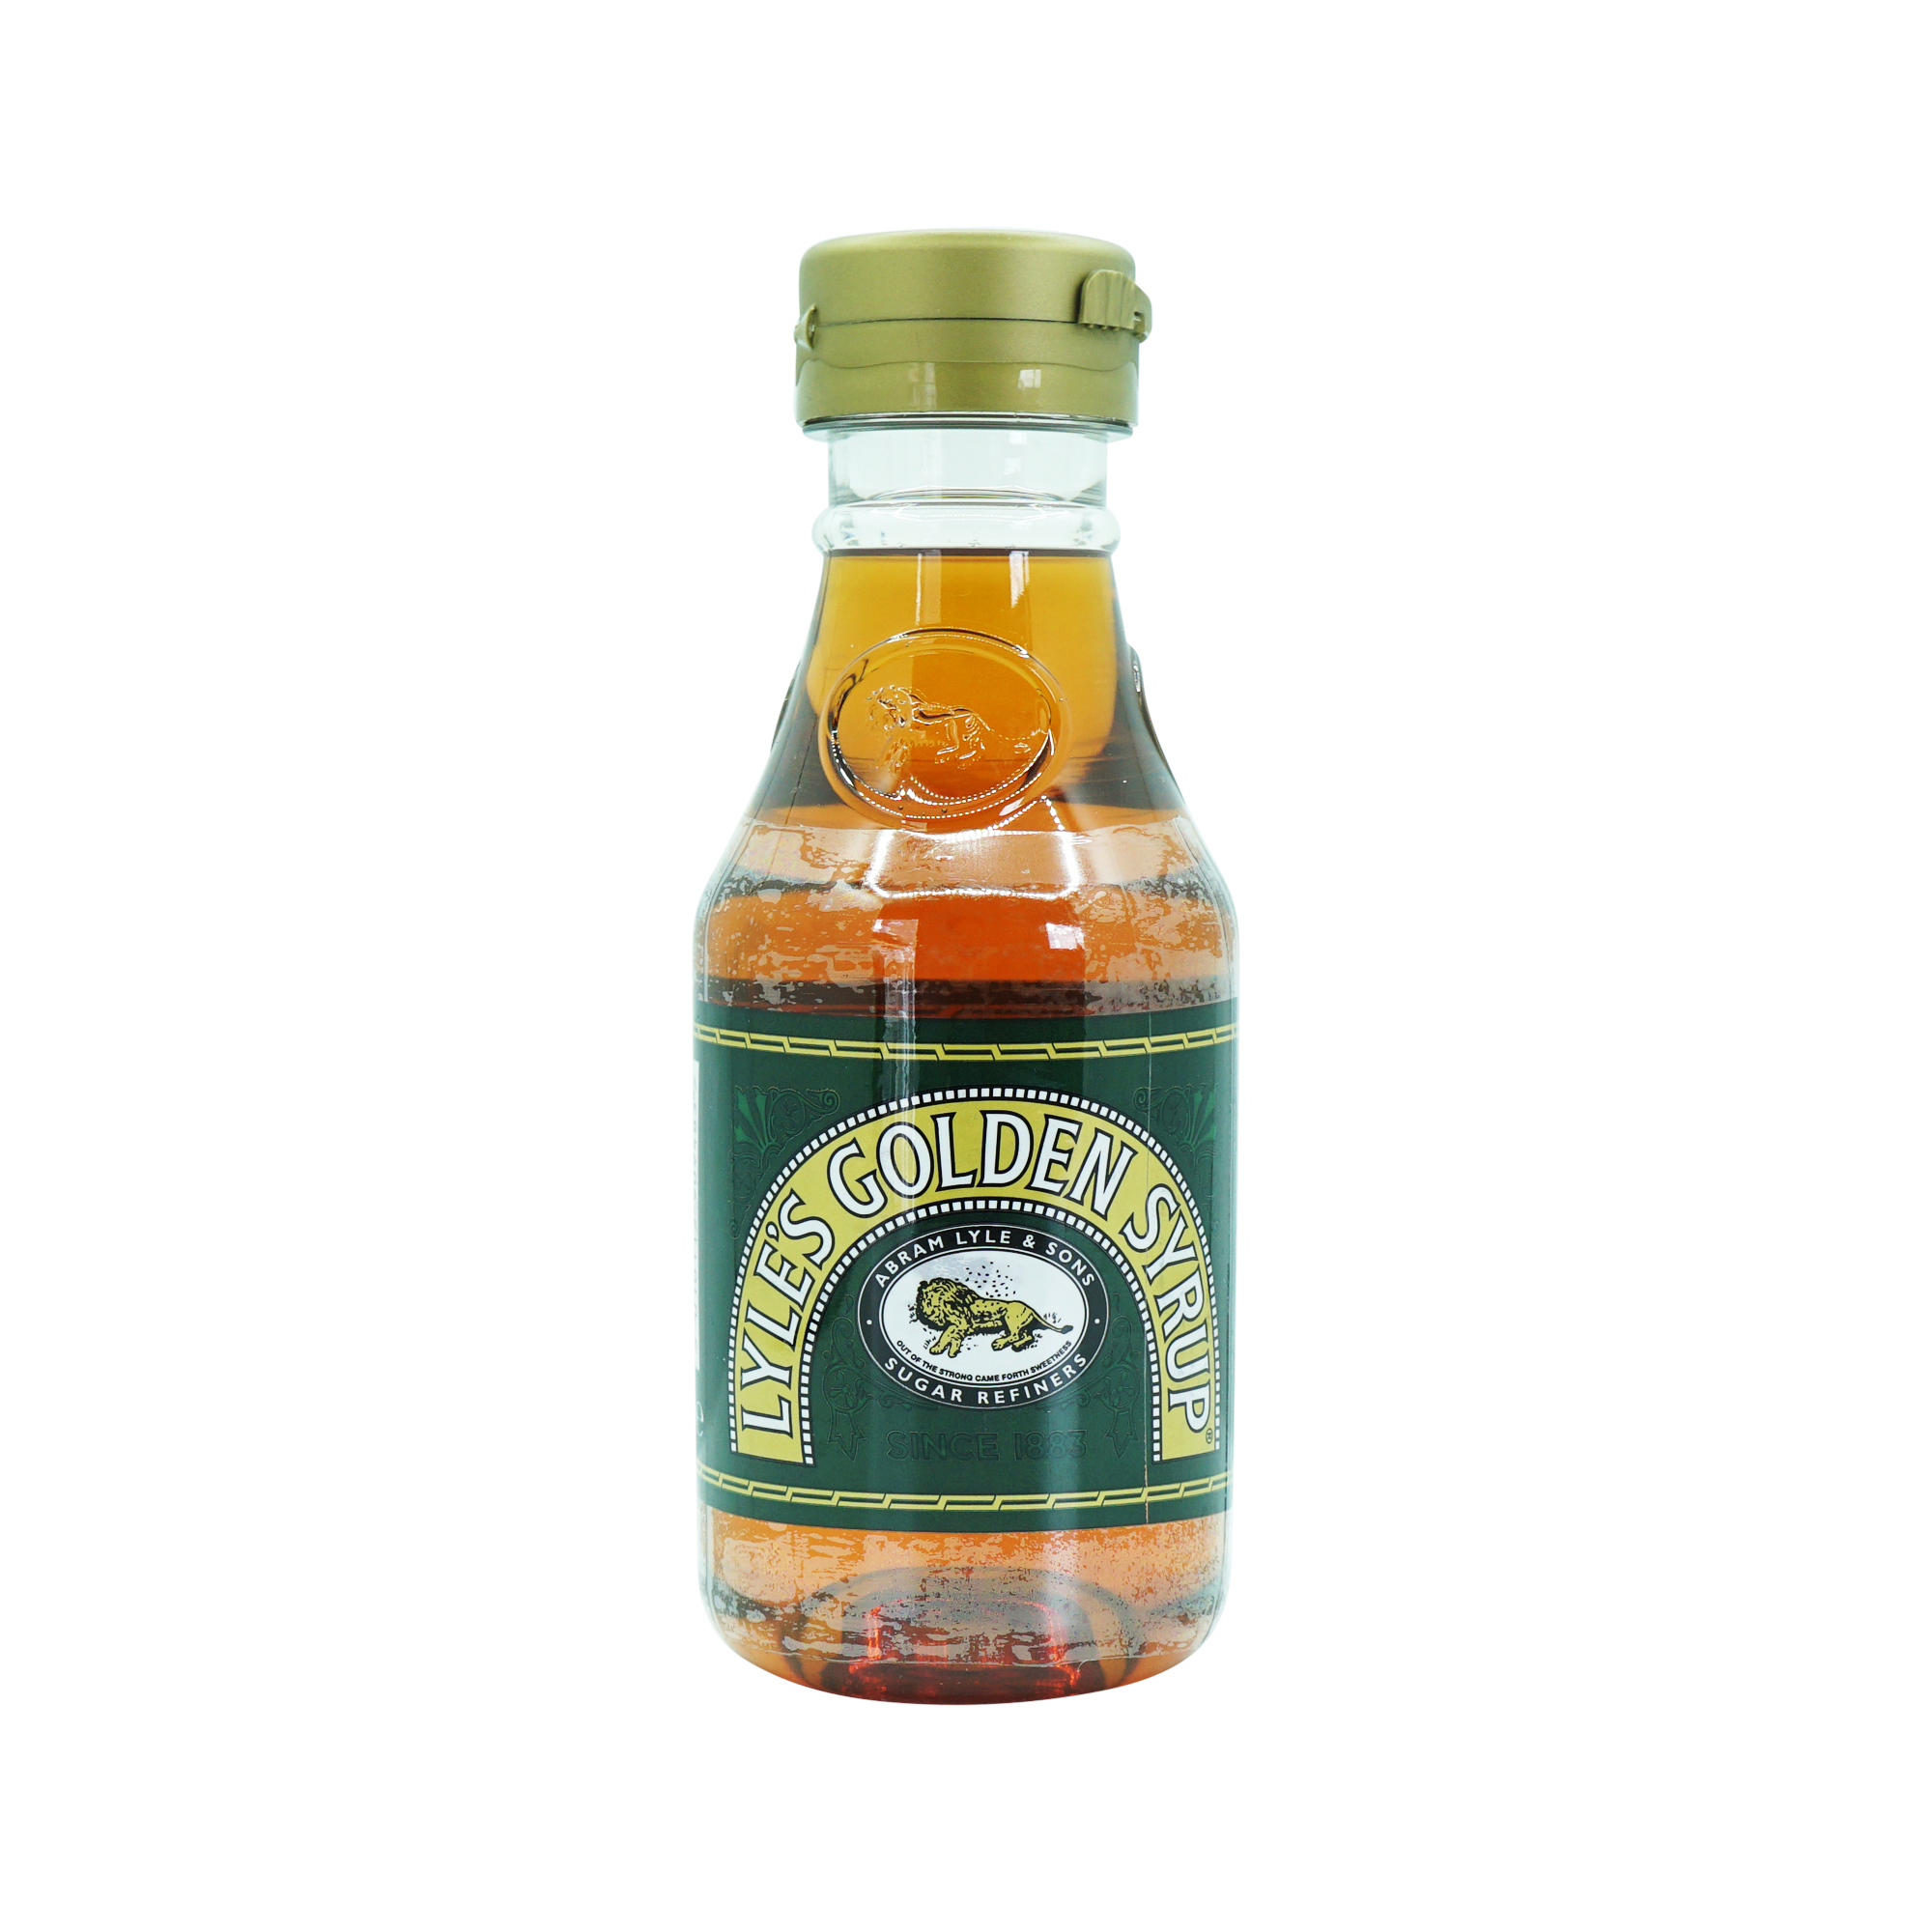 Lyle's Golden Syrup Pouring (454g)